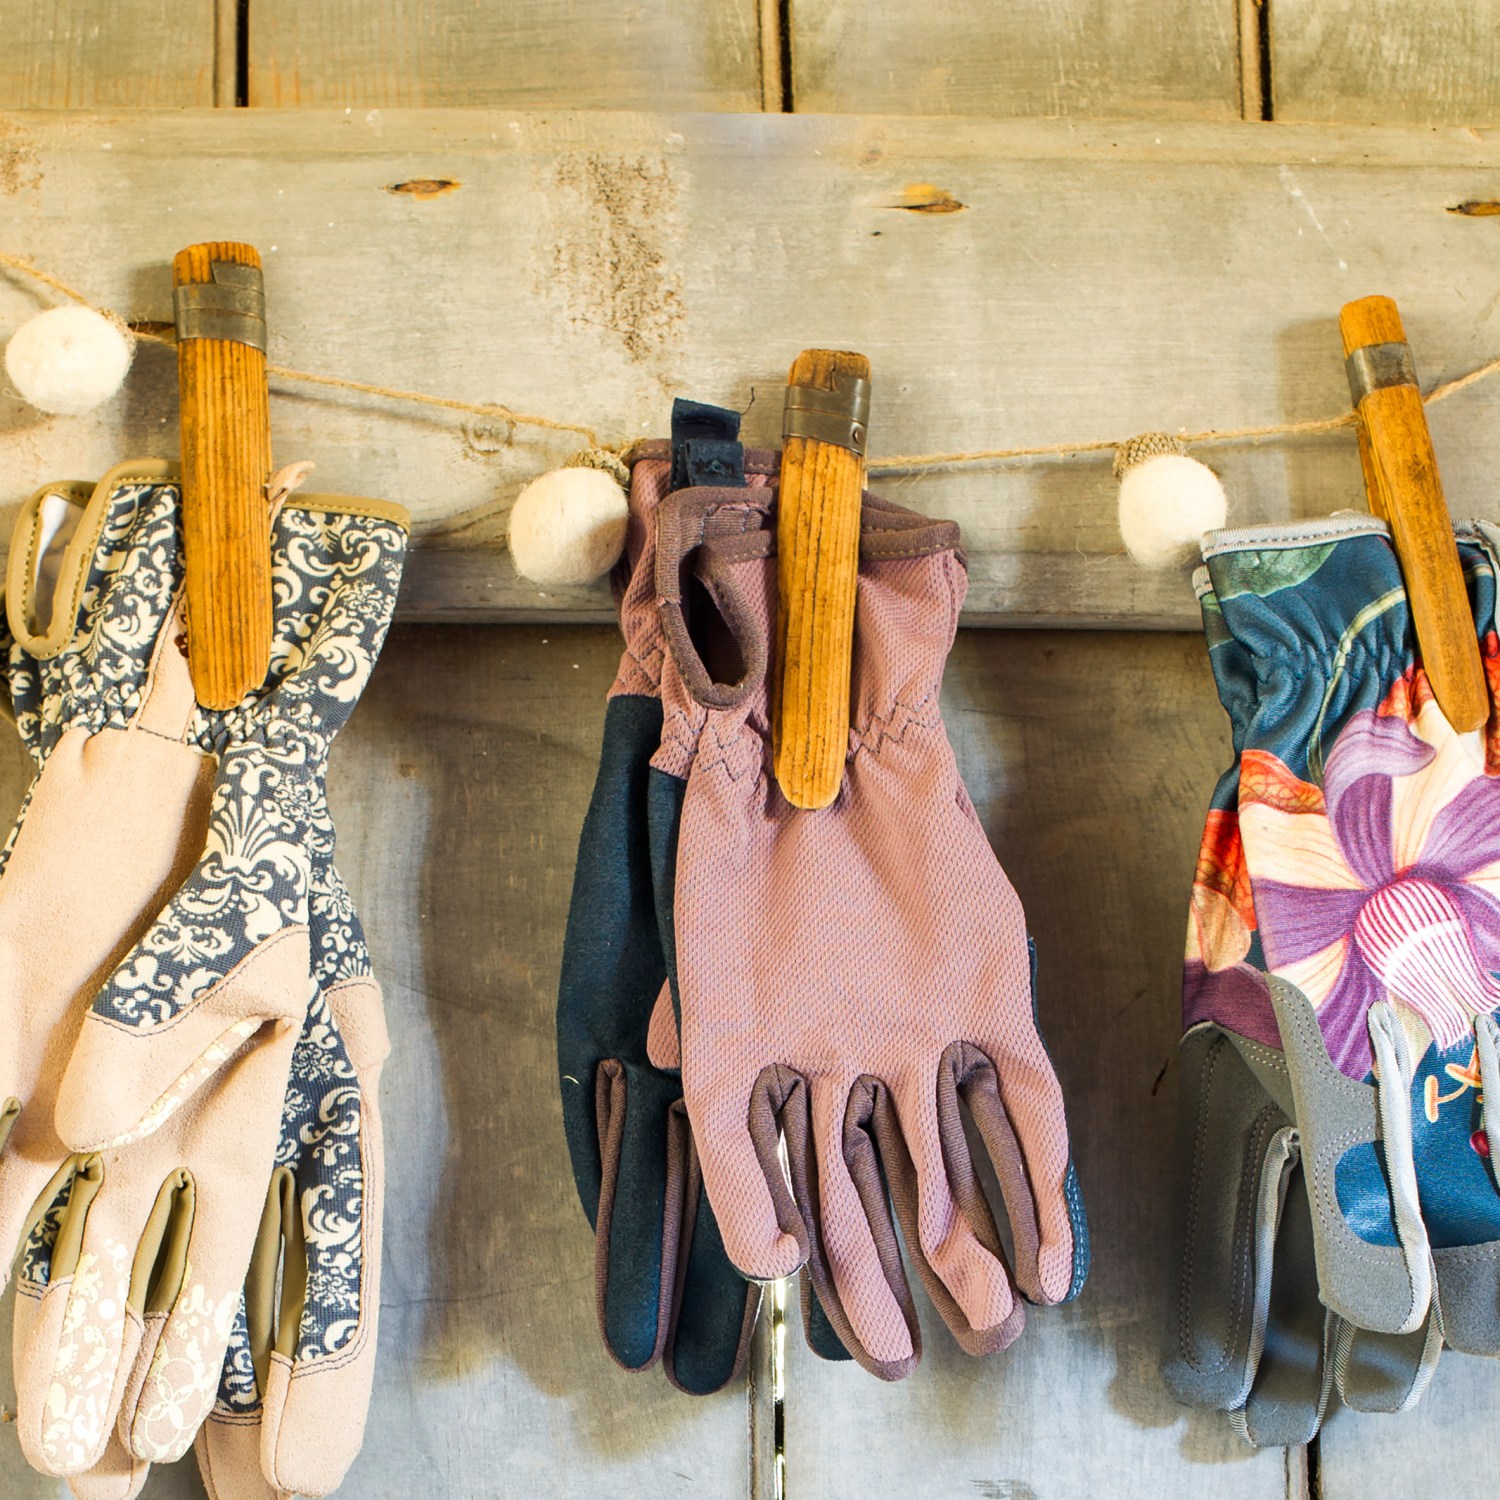 Garden gloves stored on line with clothespins